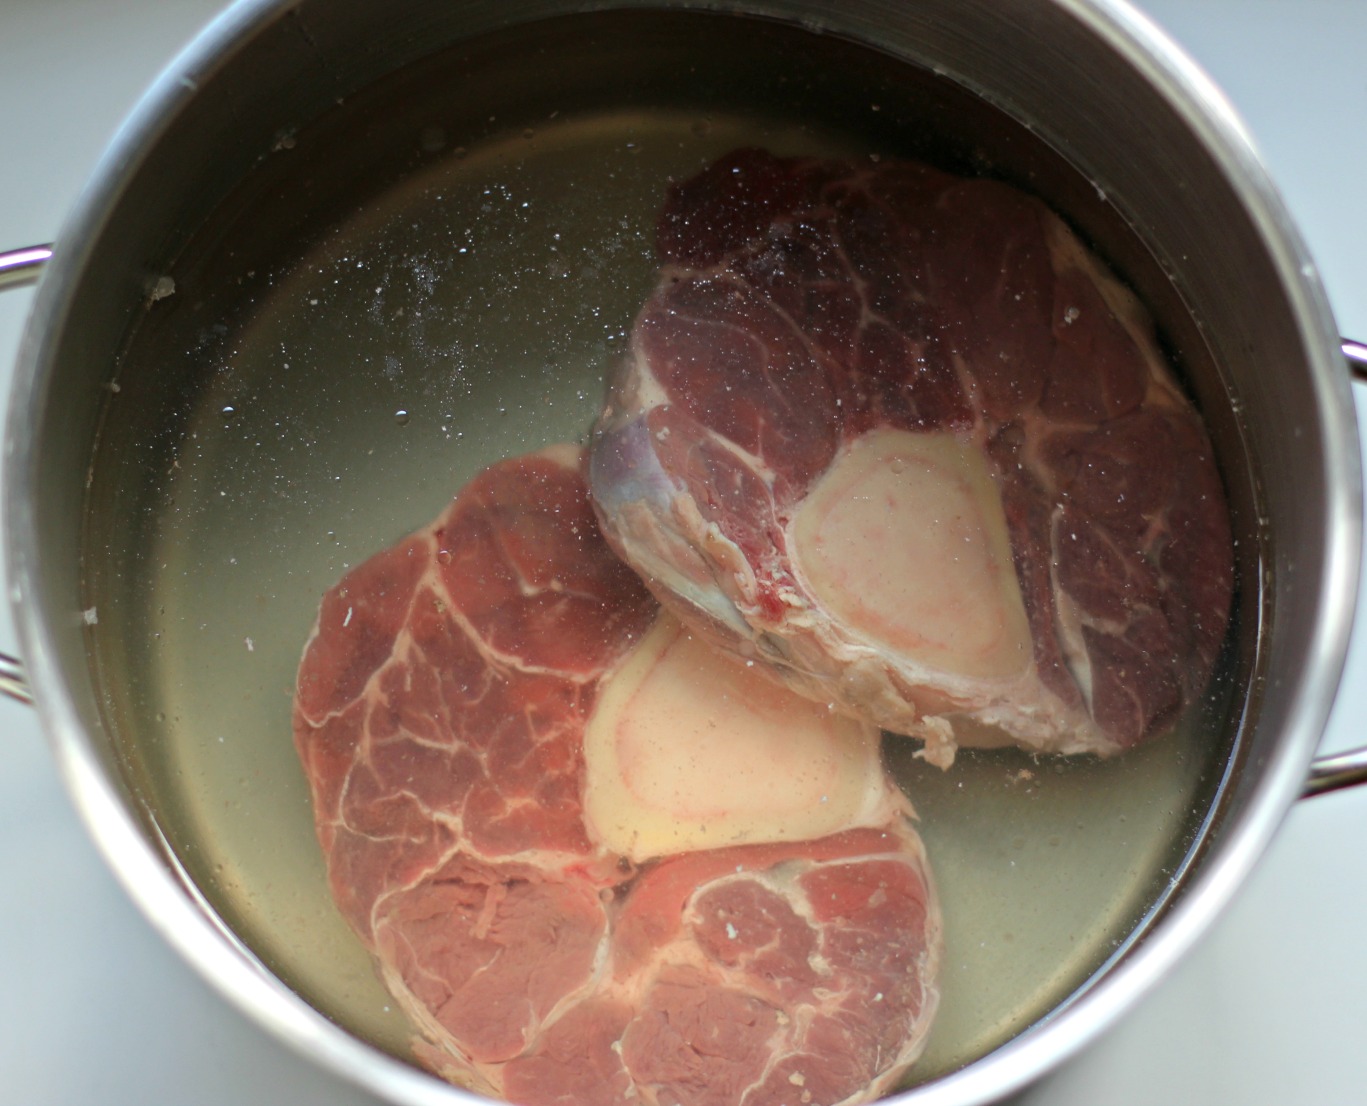 Put the leg slices in cold water for the broth.